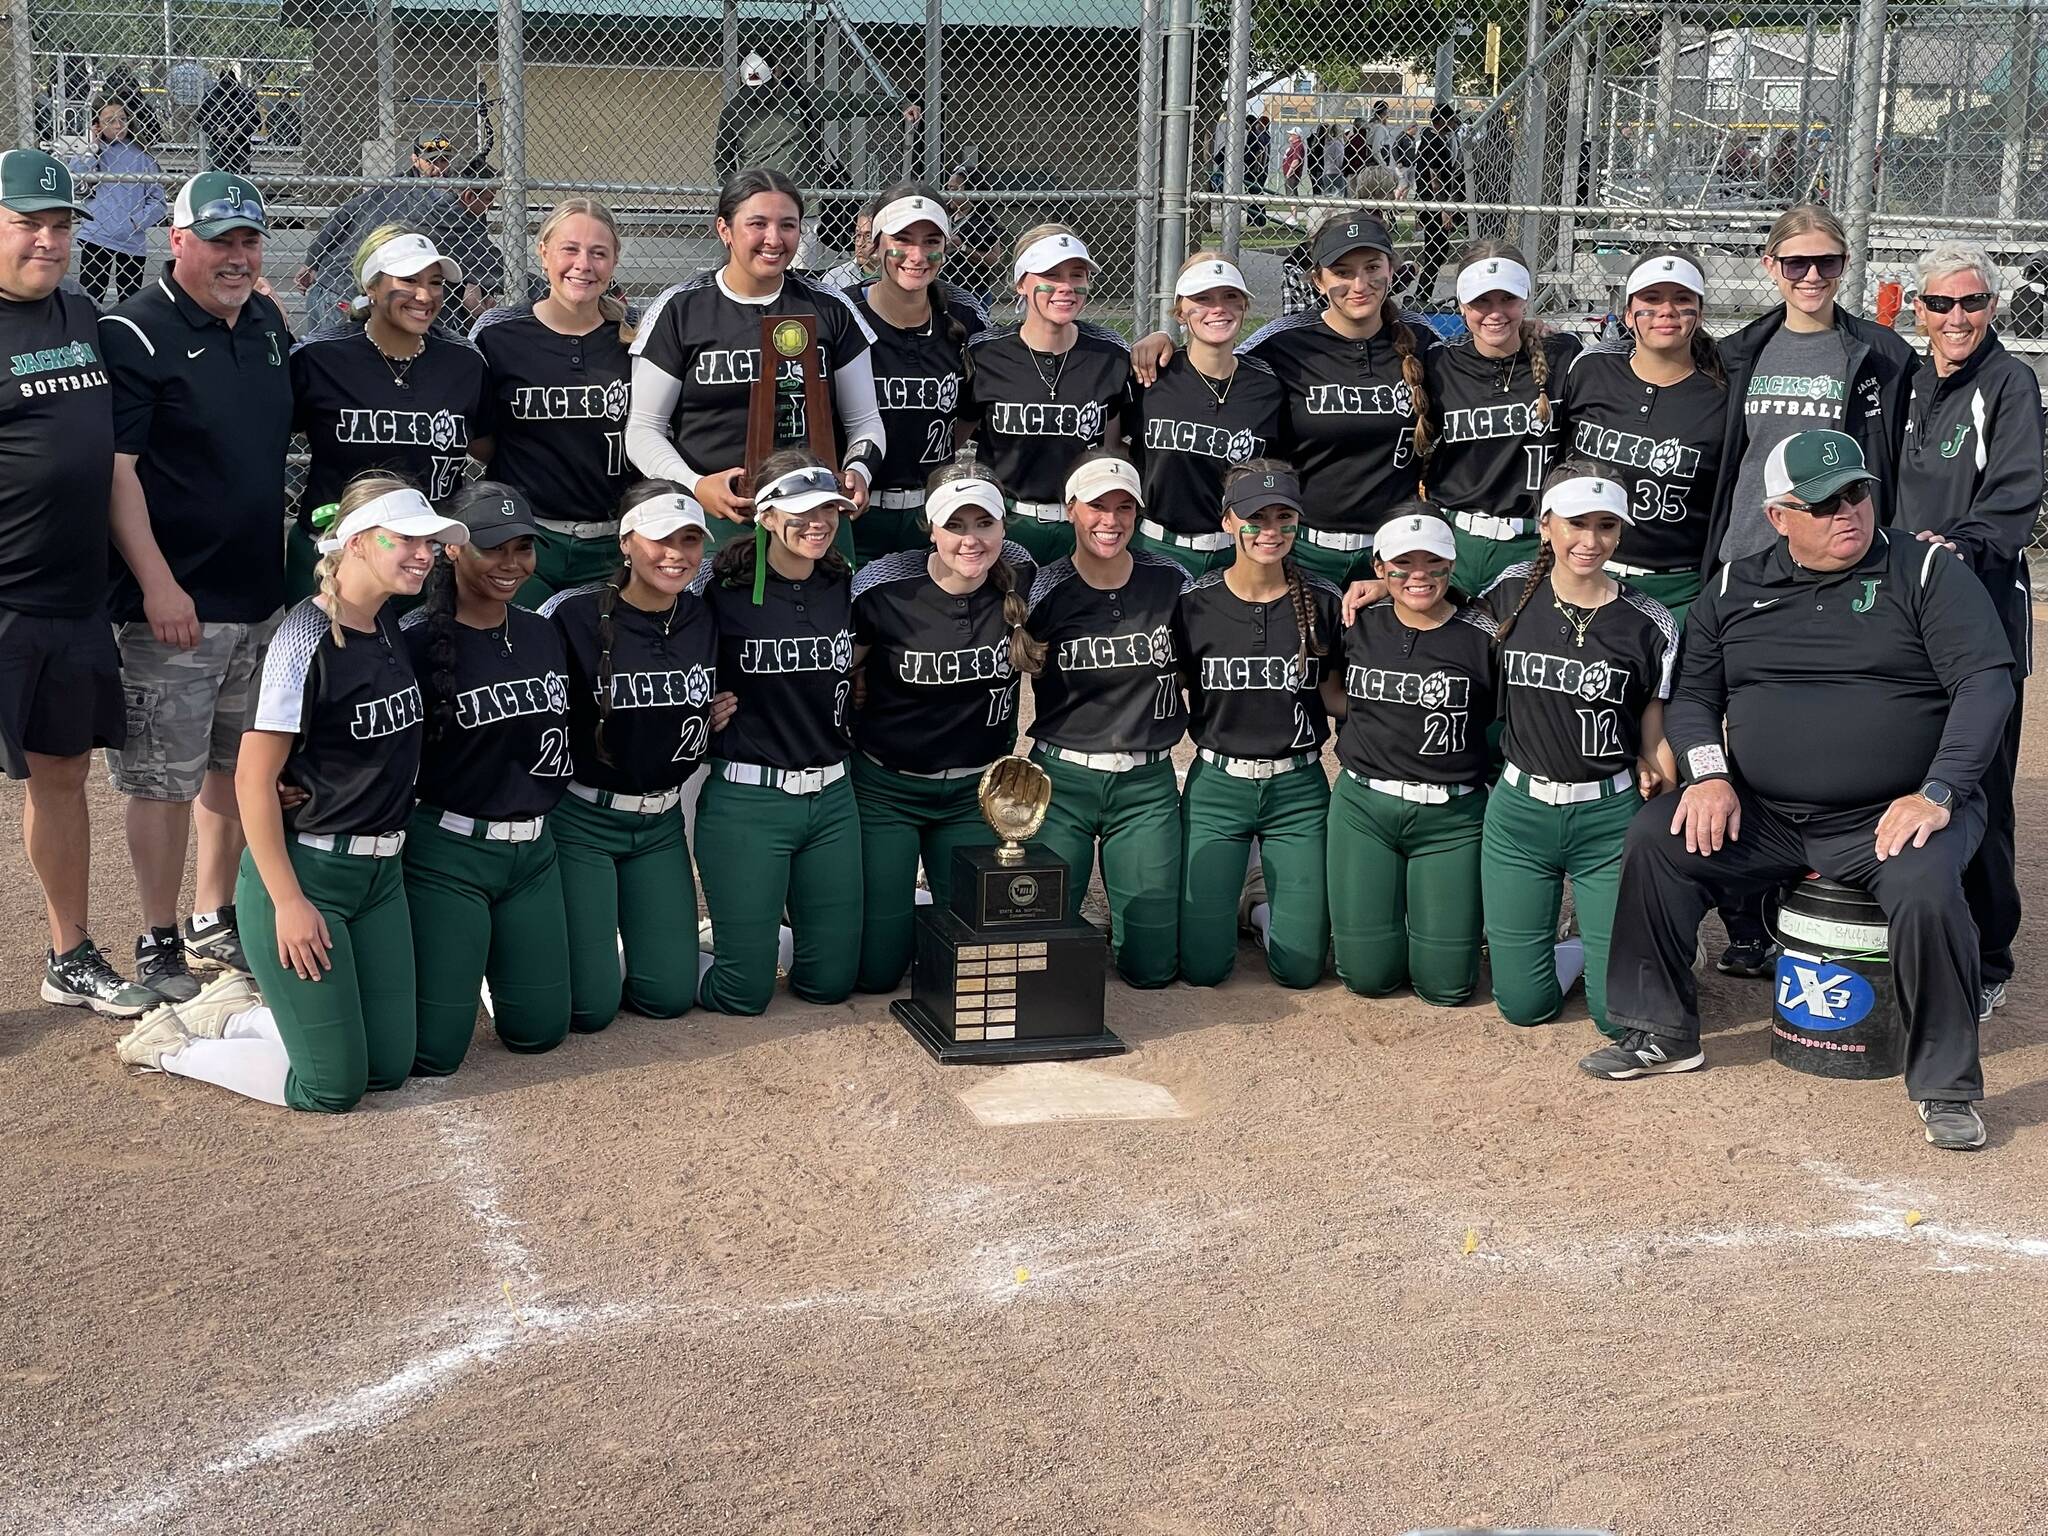 The Jackson softball team poses with the Class 4A state tournament trophy after a 10-1 triumph over Emerald Ridge Saturday, May 25 at Columbia Playfield in Richland, WA. (Aaron Coe / The Herald).